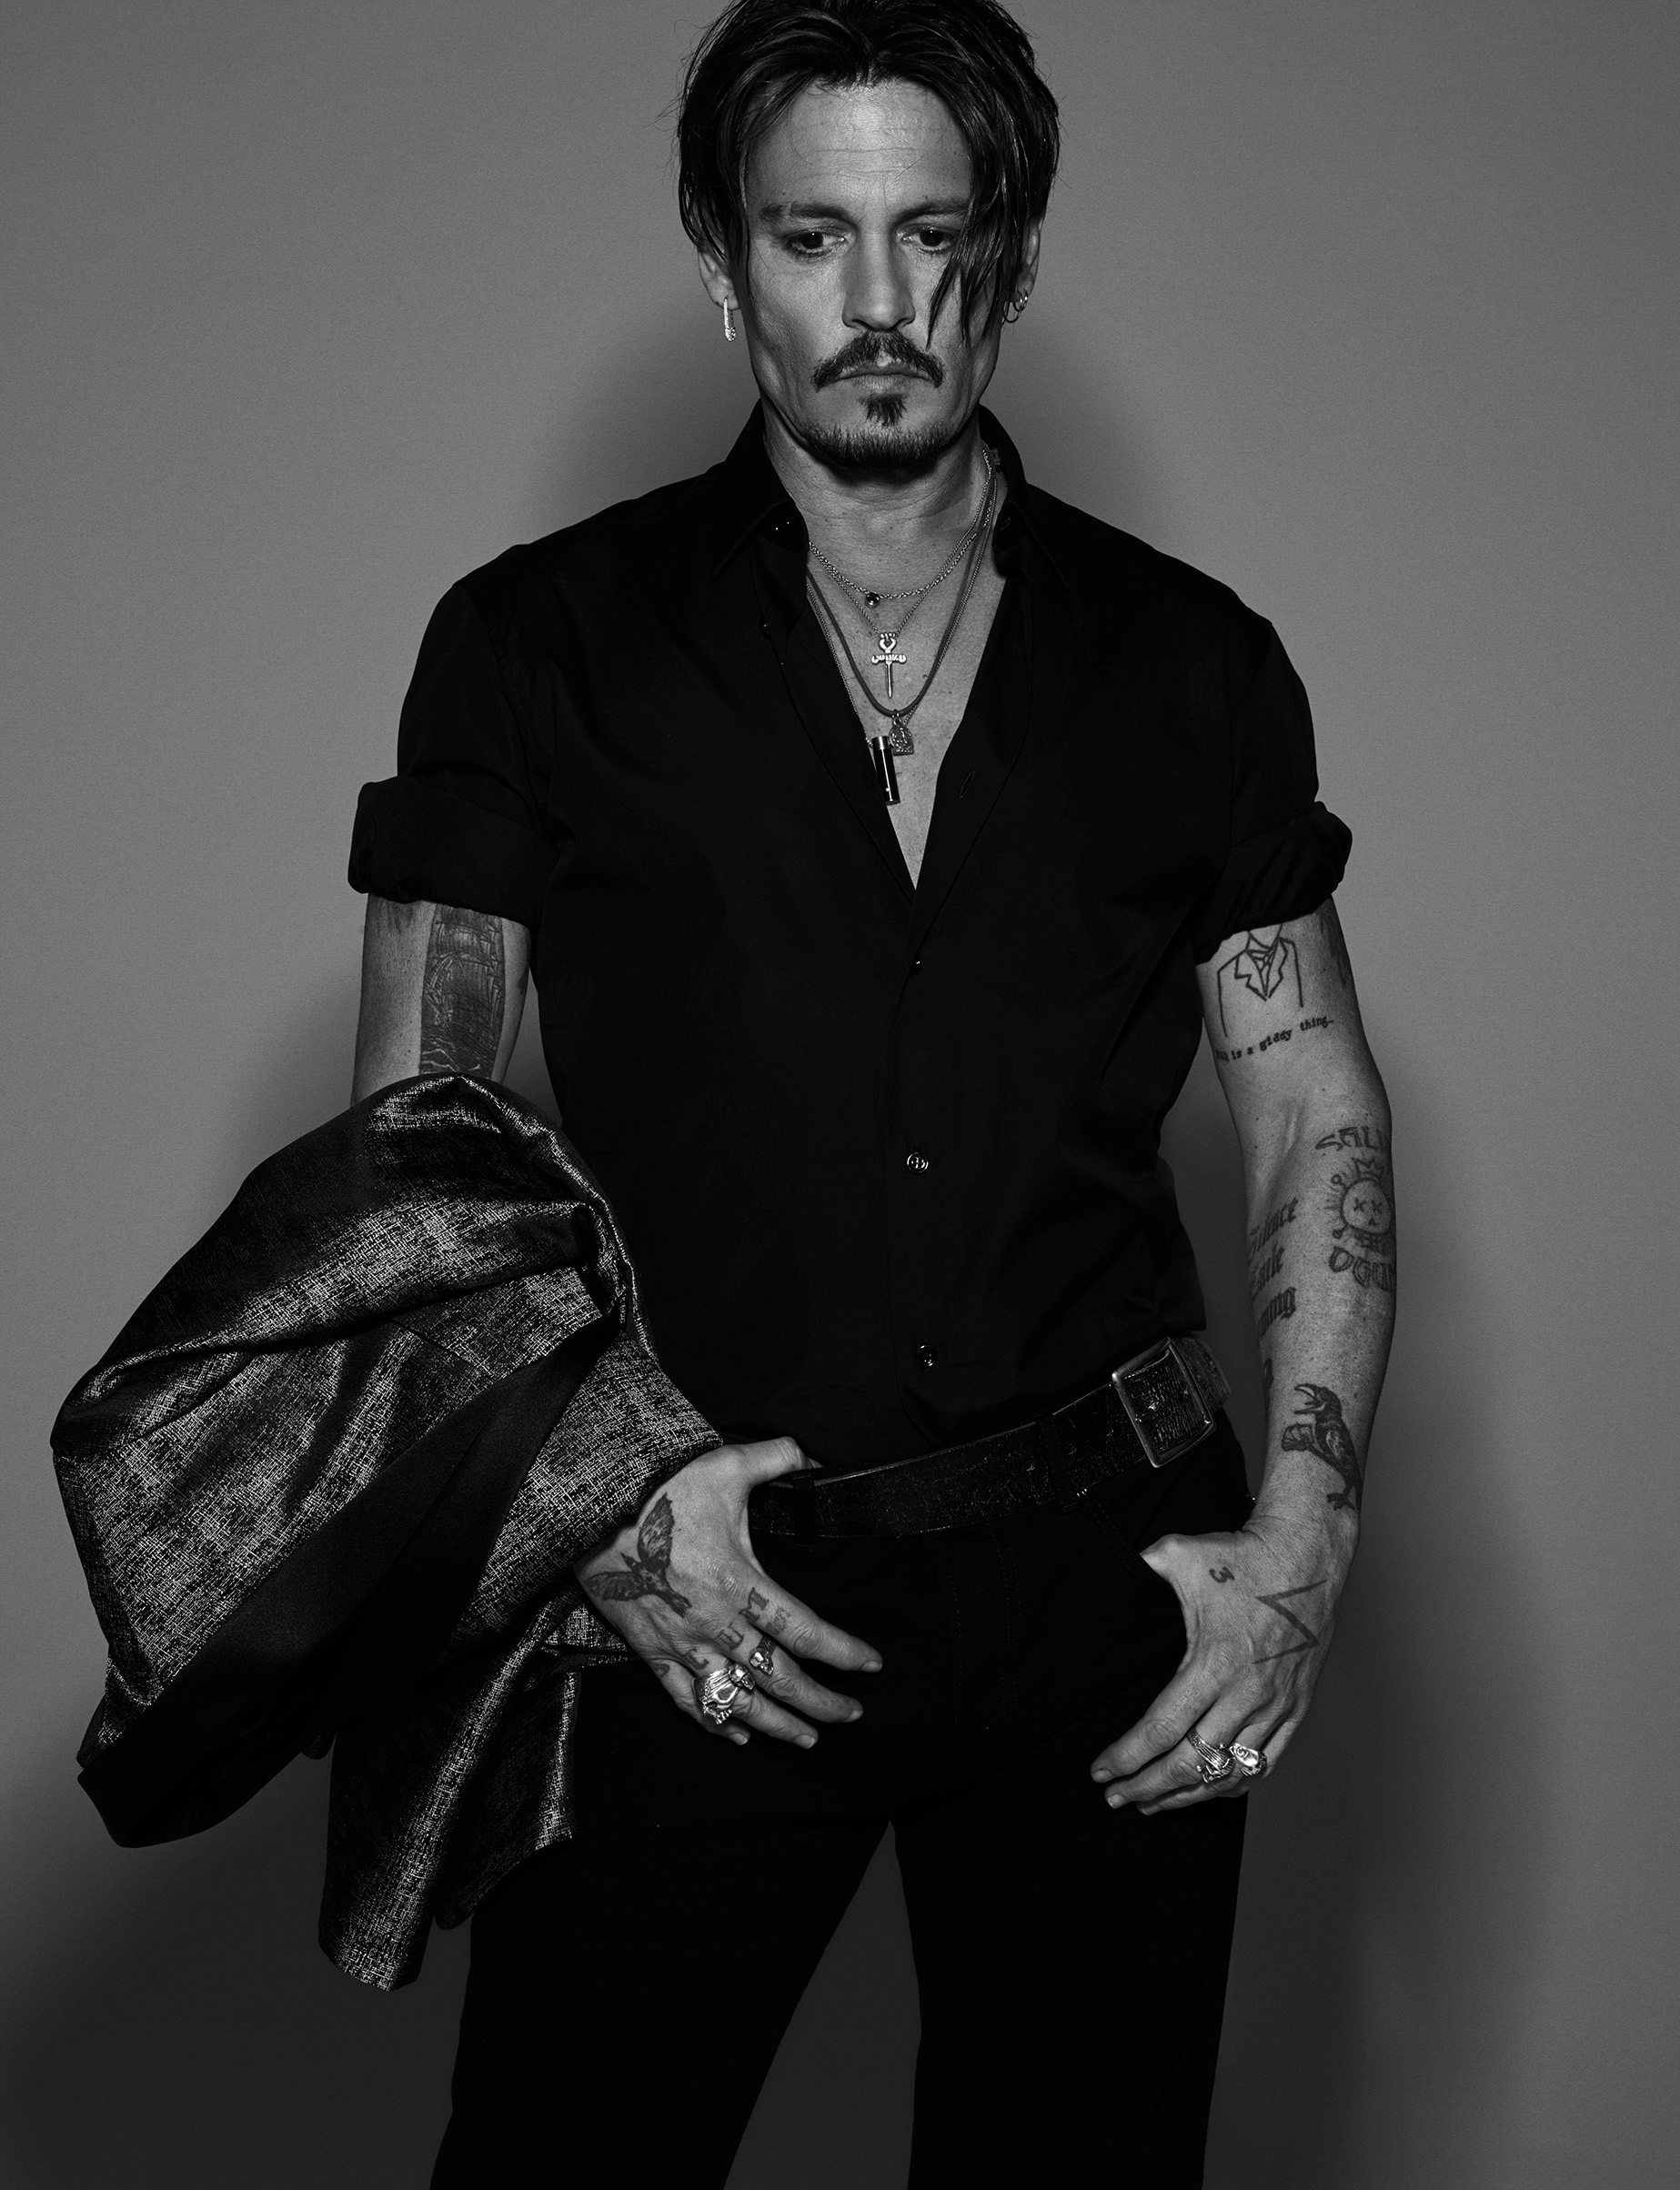 Johnny Depp by Jean-Baptiste Mondino. Photograph published in Numéro Homme #34 in 2017.
Exclusive signed print for the "Mondino Numéro 20 ans" exhibition at the Studio des Acacias in Paris. Inkjet print on Rauch Dos Bleu paper. 
